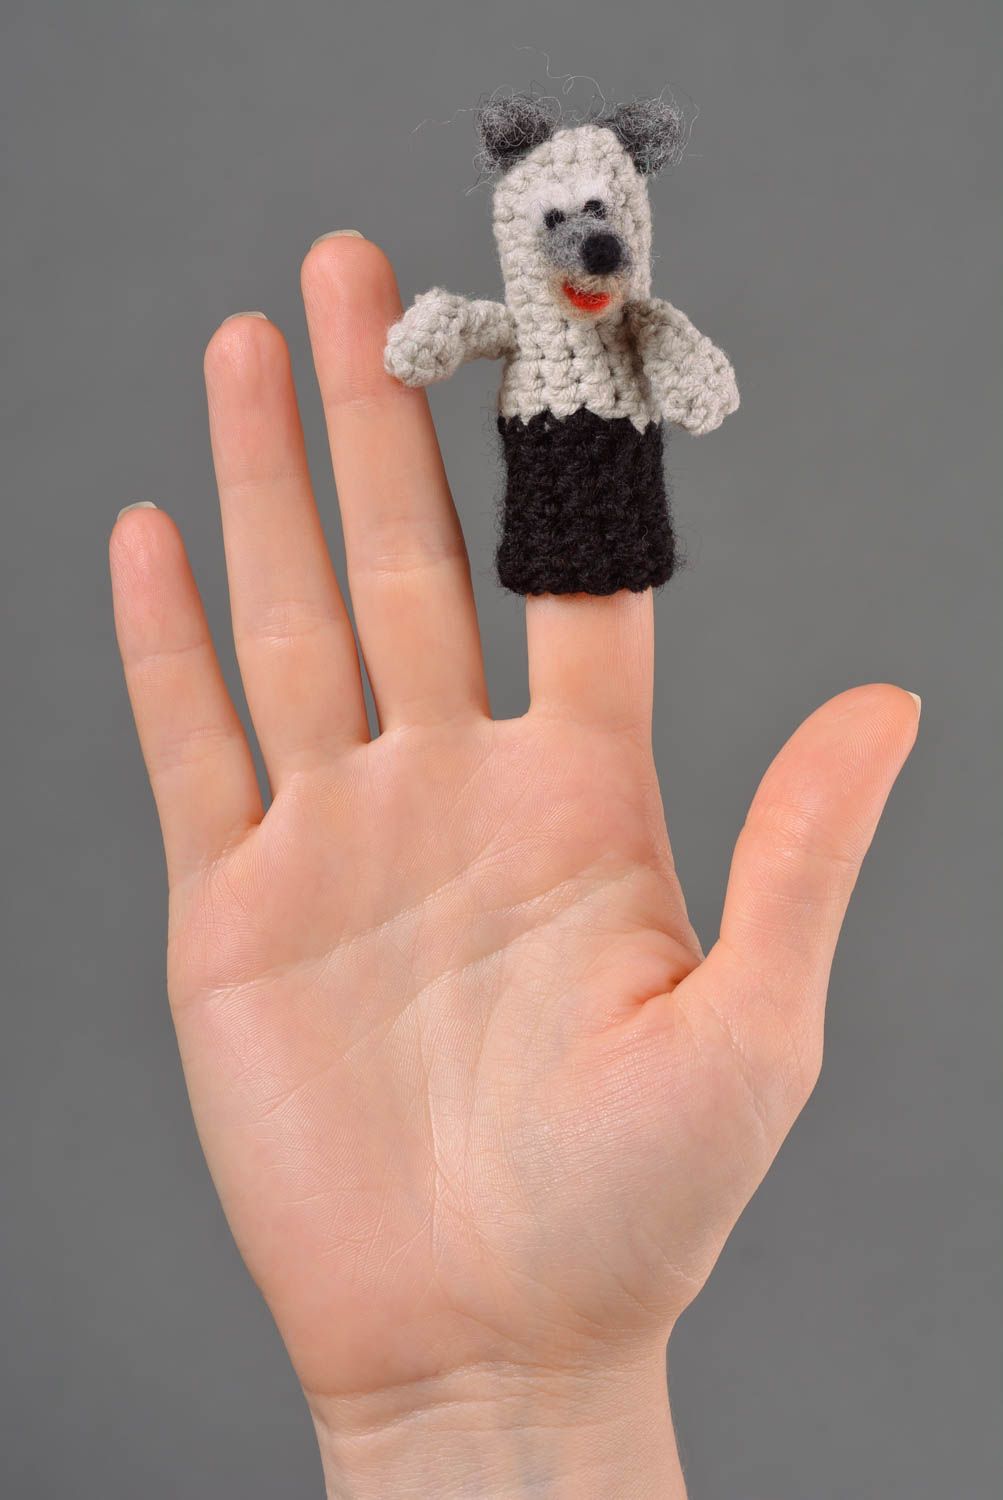 Beautiful handmade crochet toy puppetry ideas the marionette baby toys photo 3